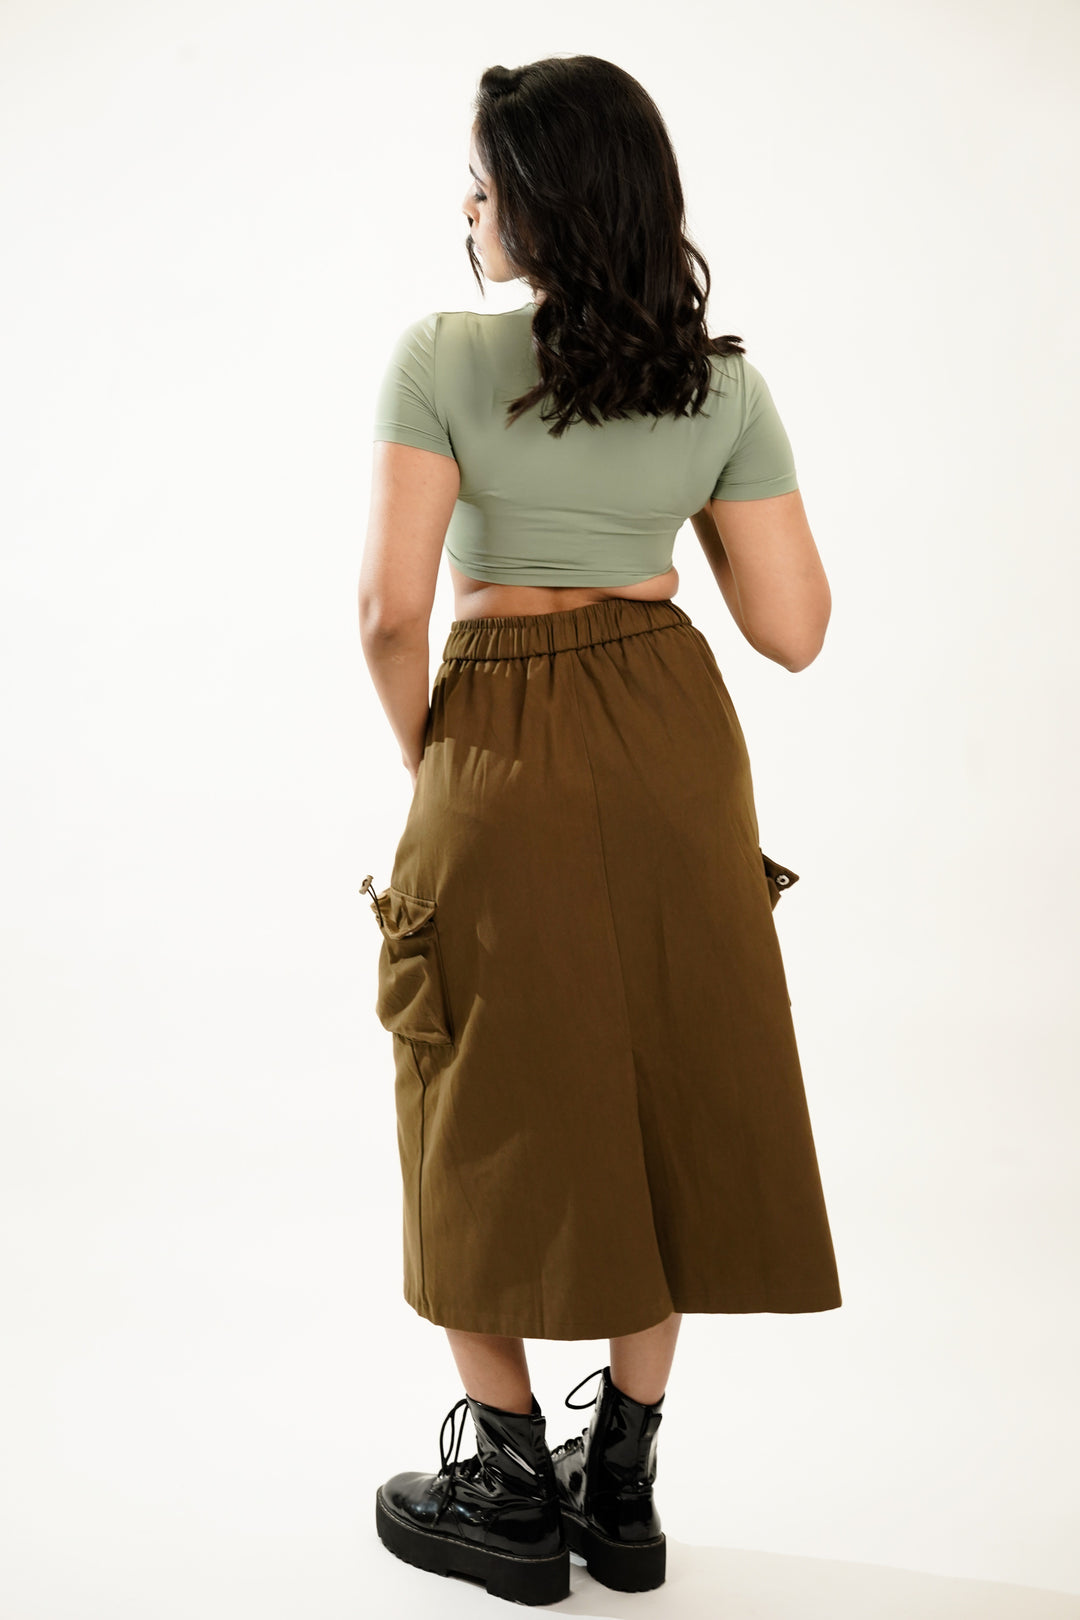 army green twill skirt for vacation and regular wear